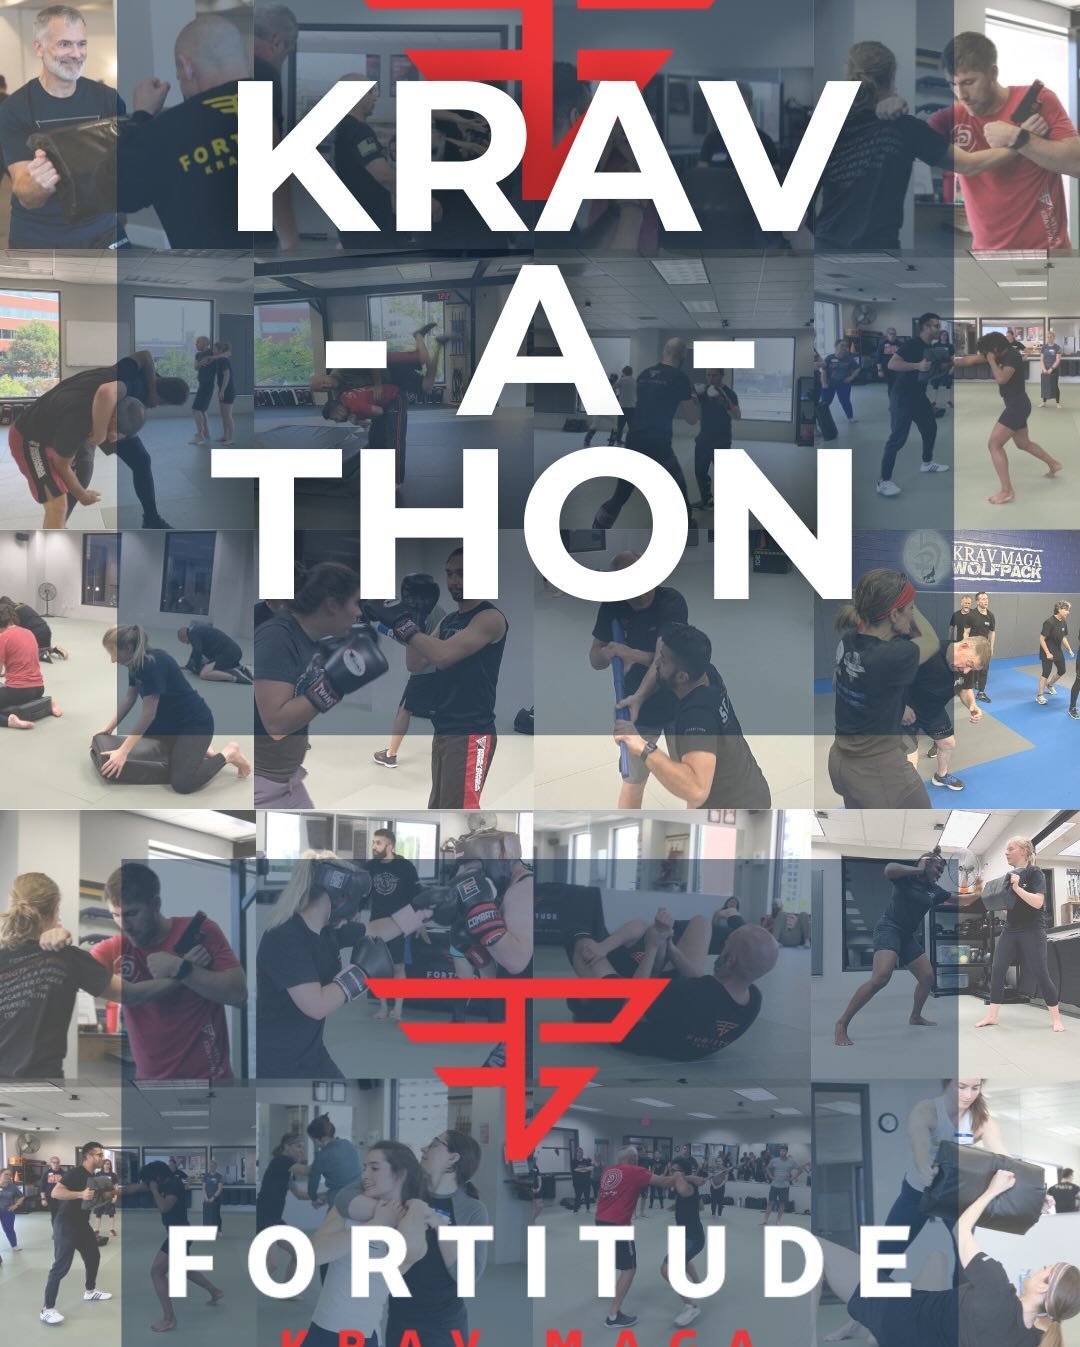 We are so excited to come alongside the American Cancer Society this summer to raise money for their organization! To do so, we are planning to do what we do best&hellip; martial arts!

We would be so grateful if you would come alongside us to suppor